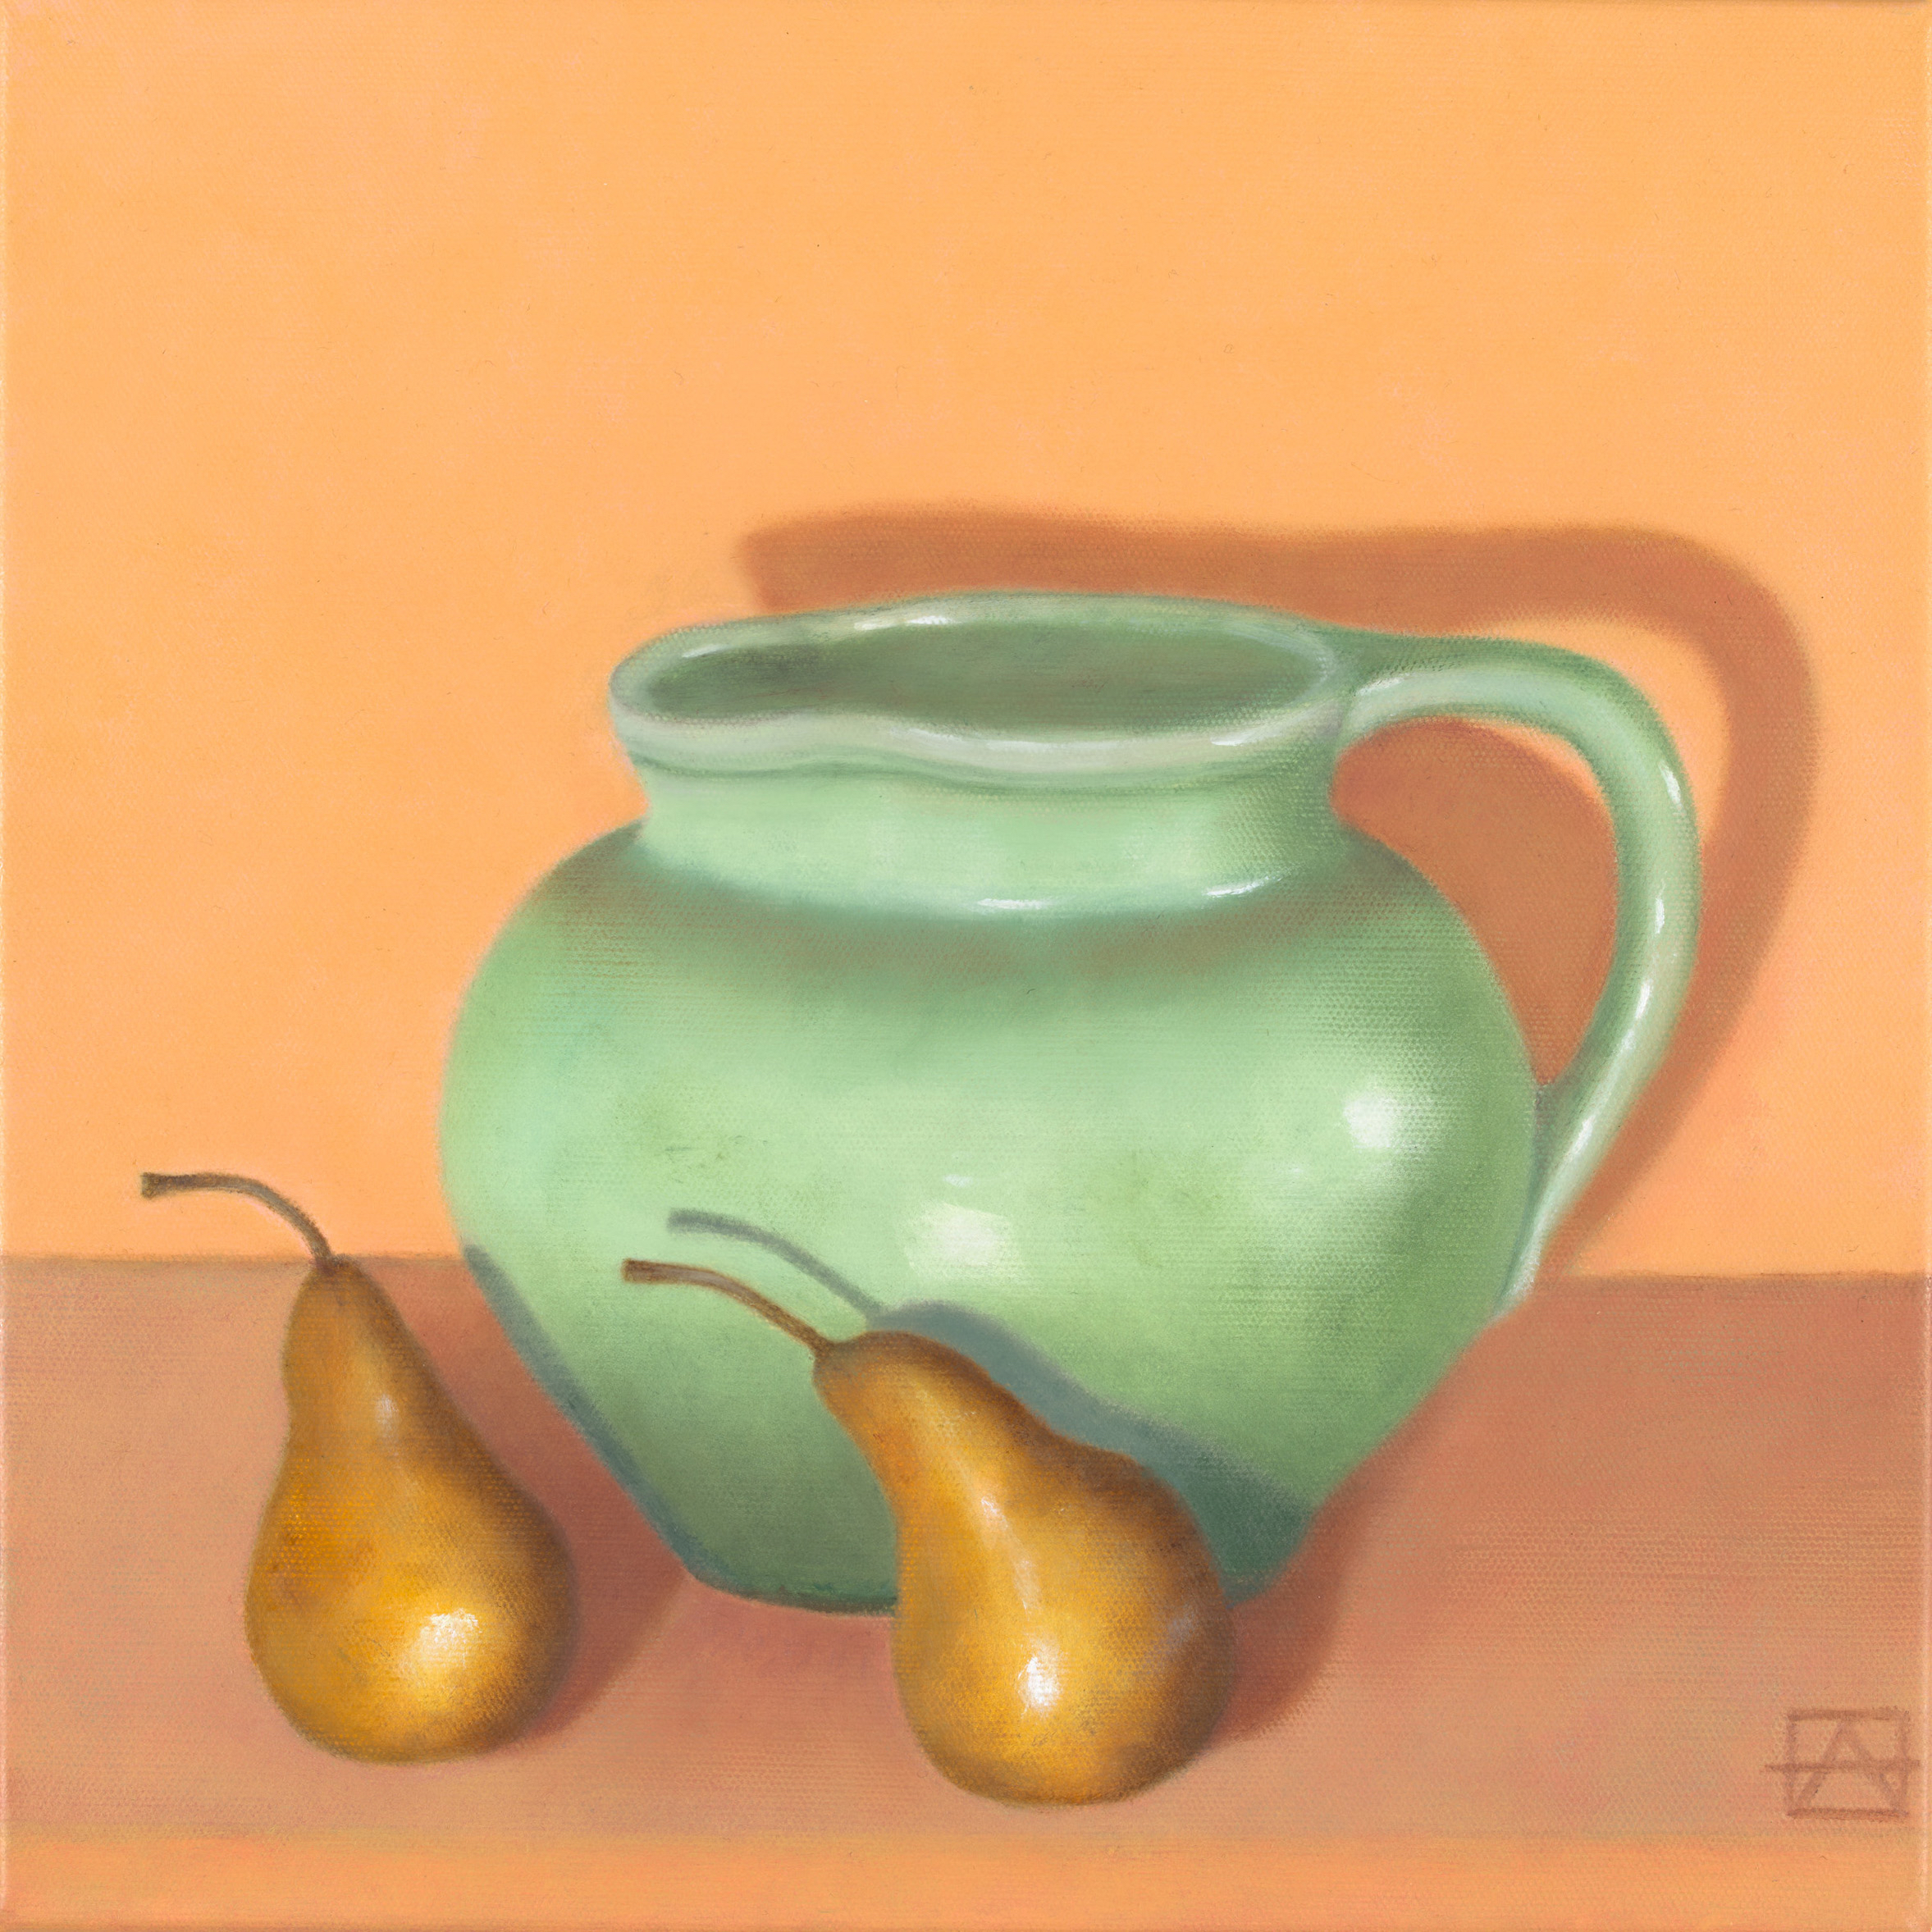 Sallee Warner/ Stoneware bowl/ clay reduction fired/ Parallel_50
Jordan_170823_011 (1).jpg
Andrea Jordan/ Green Jug with Beurre Bosc Pears/ Oil on linen/ 35 x 35cm/ Full Gamut photography